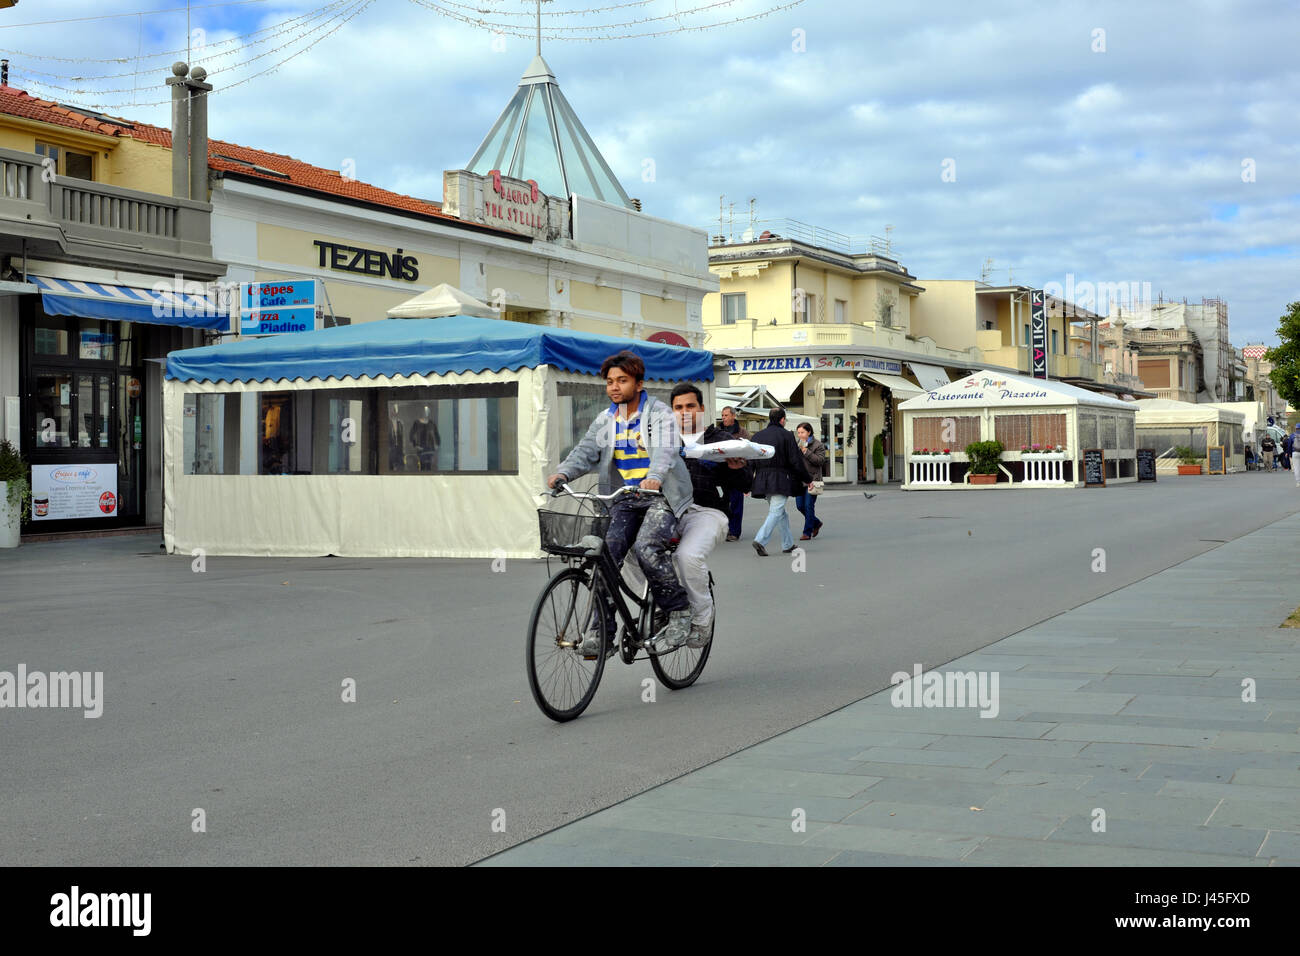 Lunchtime sustainable transport - Two male asian workers carrying lunch on a bicycle - Viareggio promenade, Tuscany, Italy, Europe Stock Photo